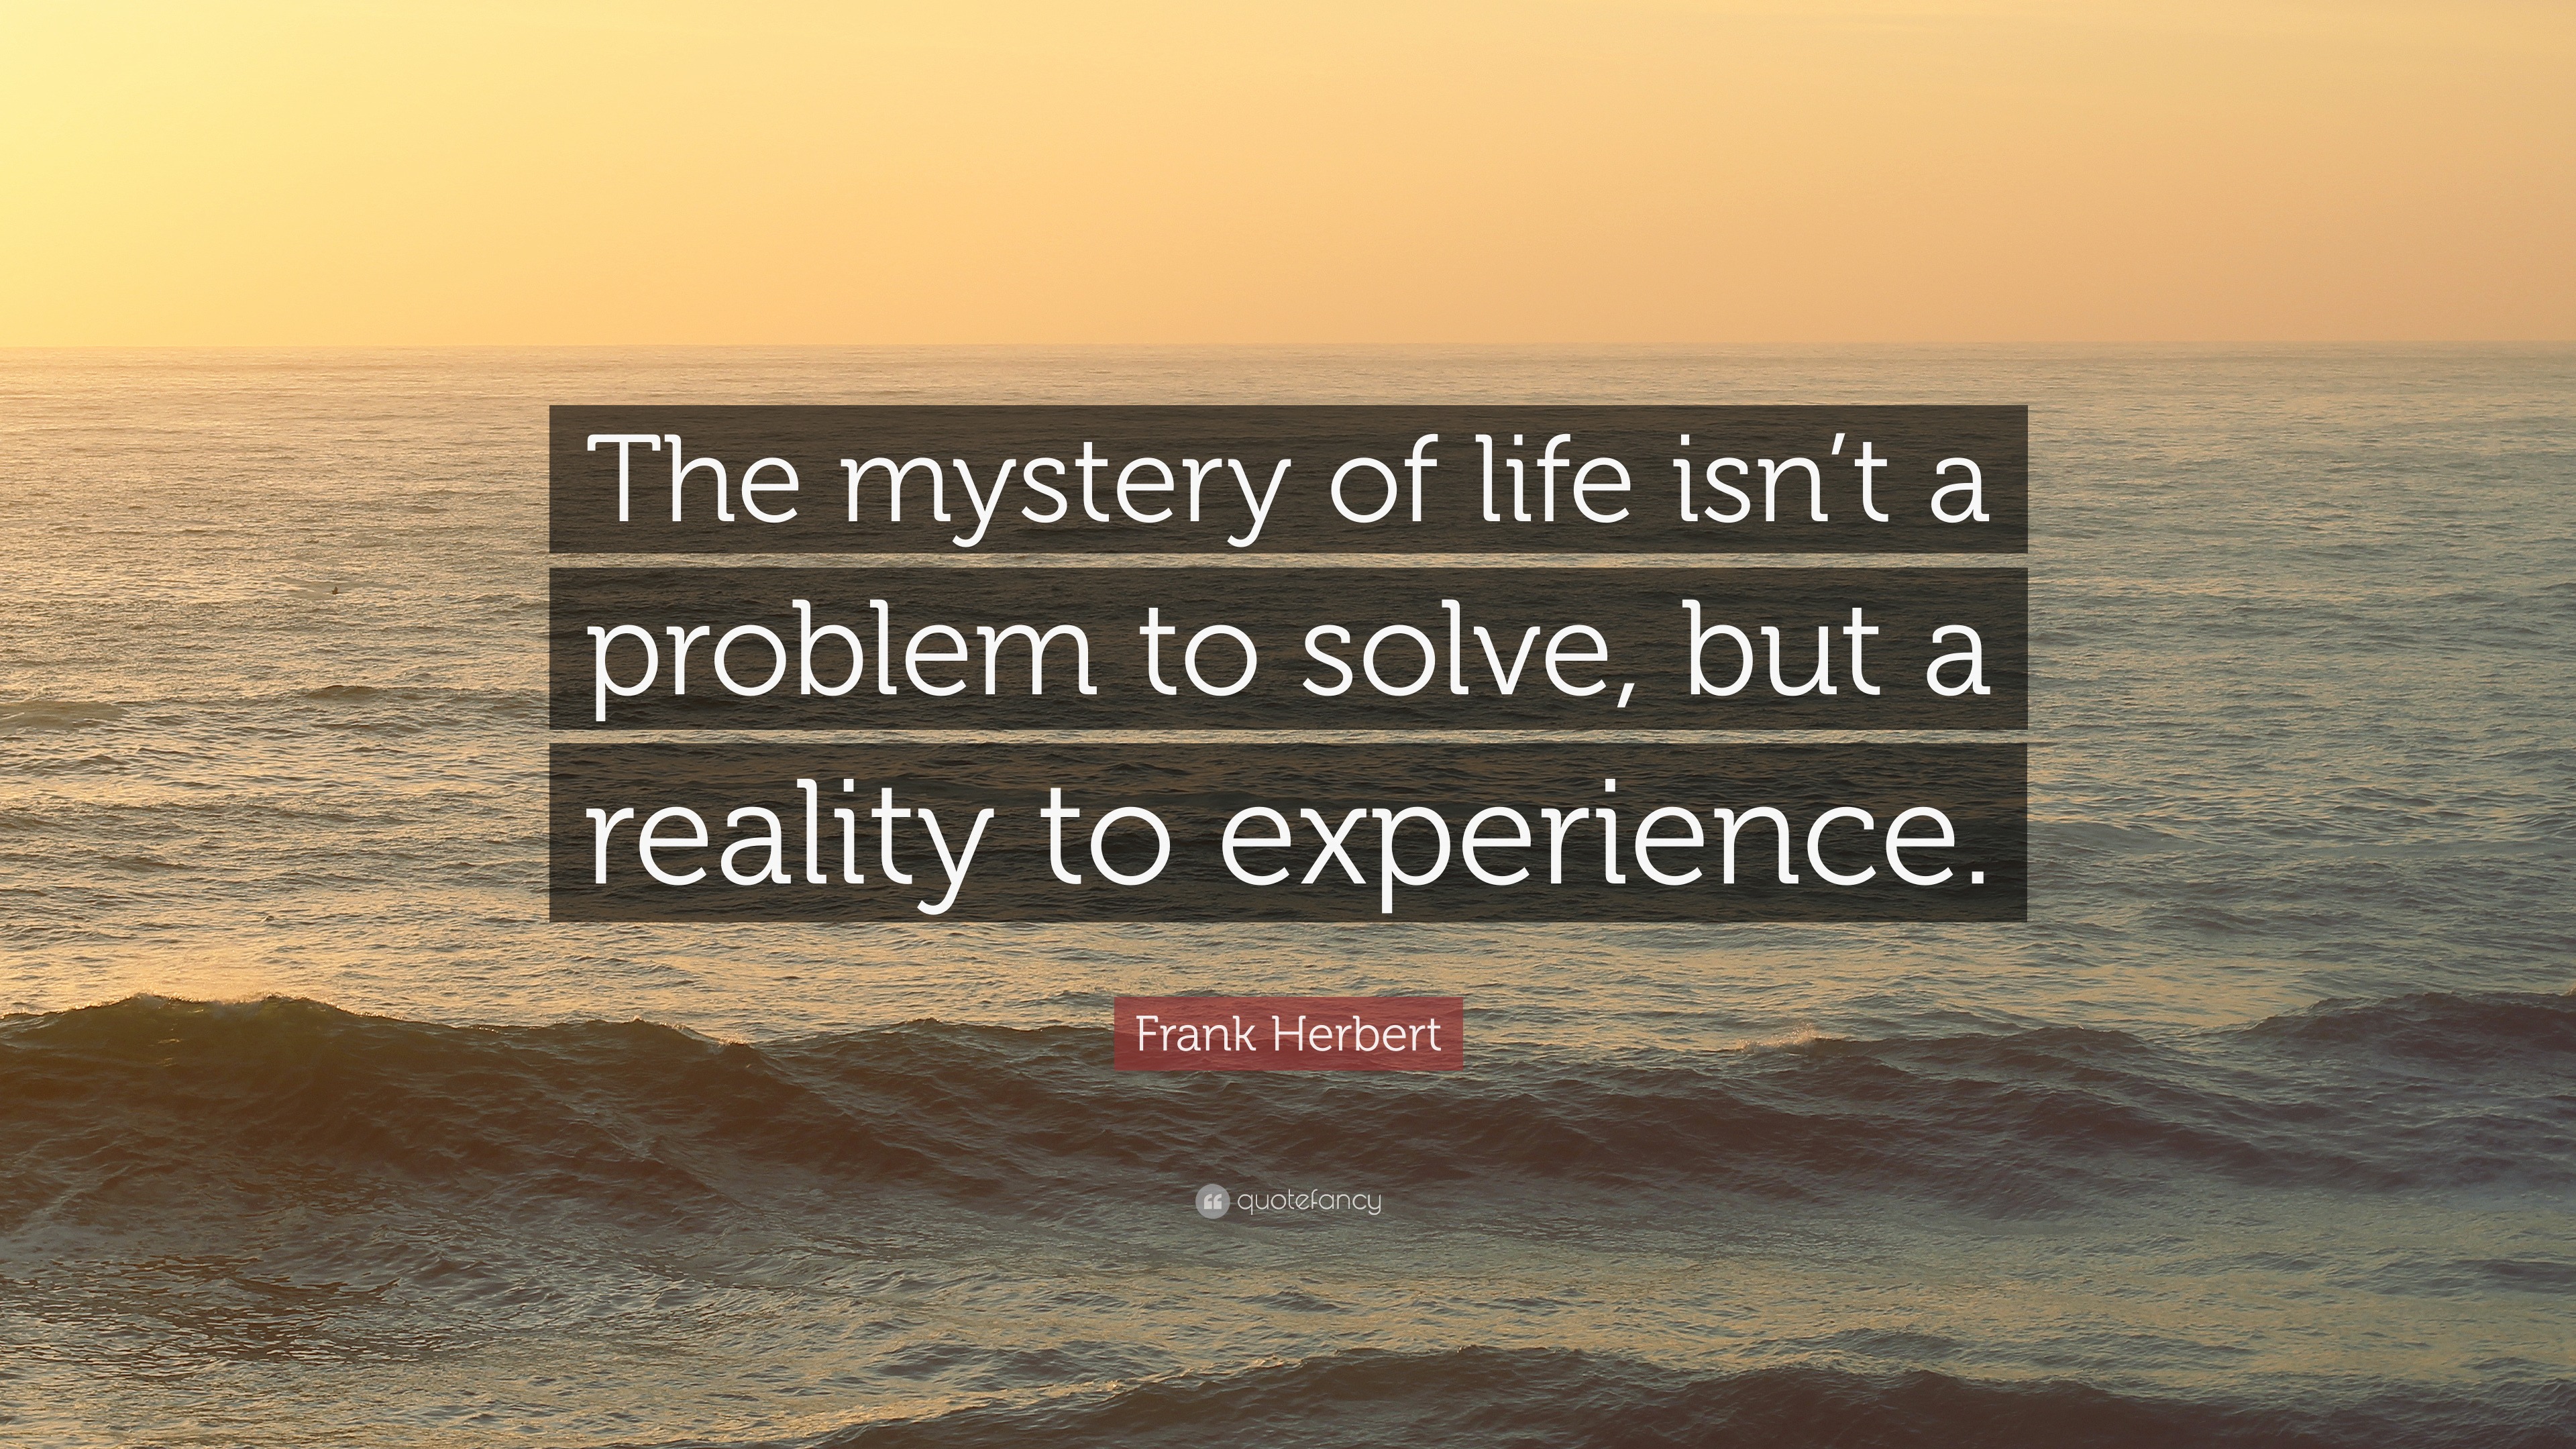 Frank Herbert Quote “The mystery of life isn’t a problem to solve, but